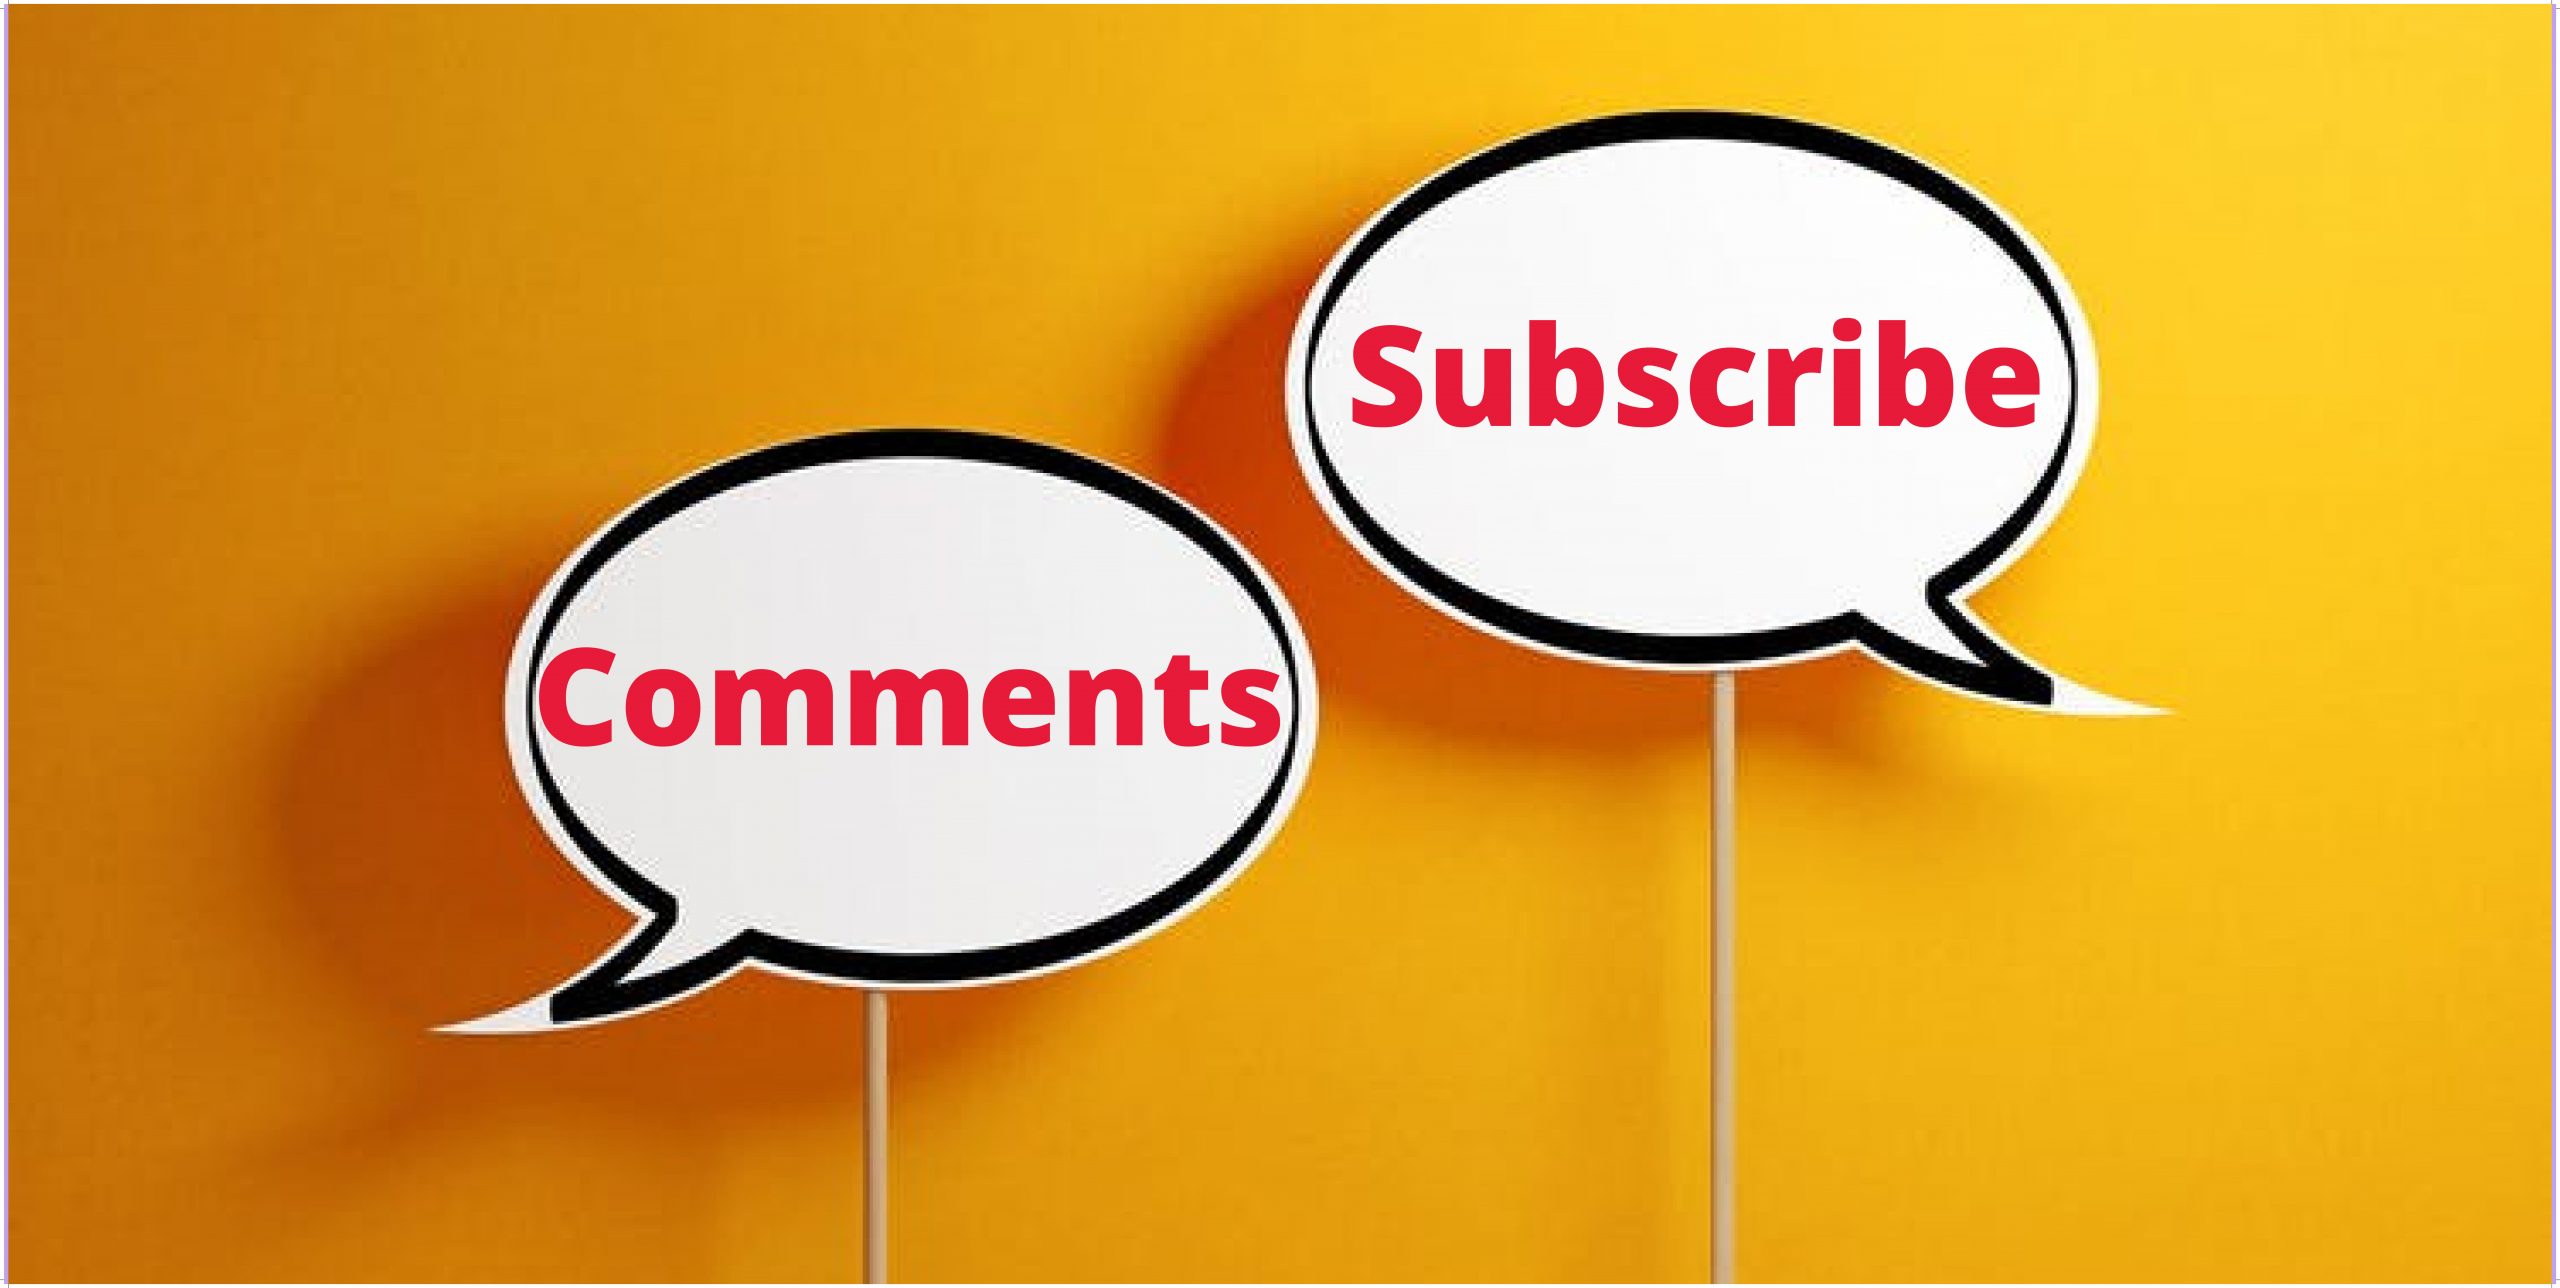 How to Assign your users to Subscribe to Comments in WordPress